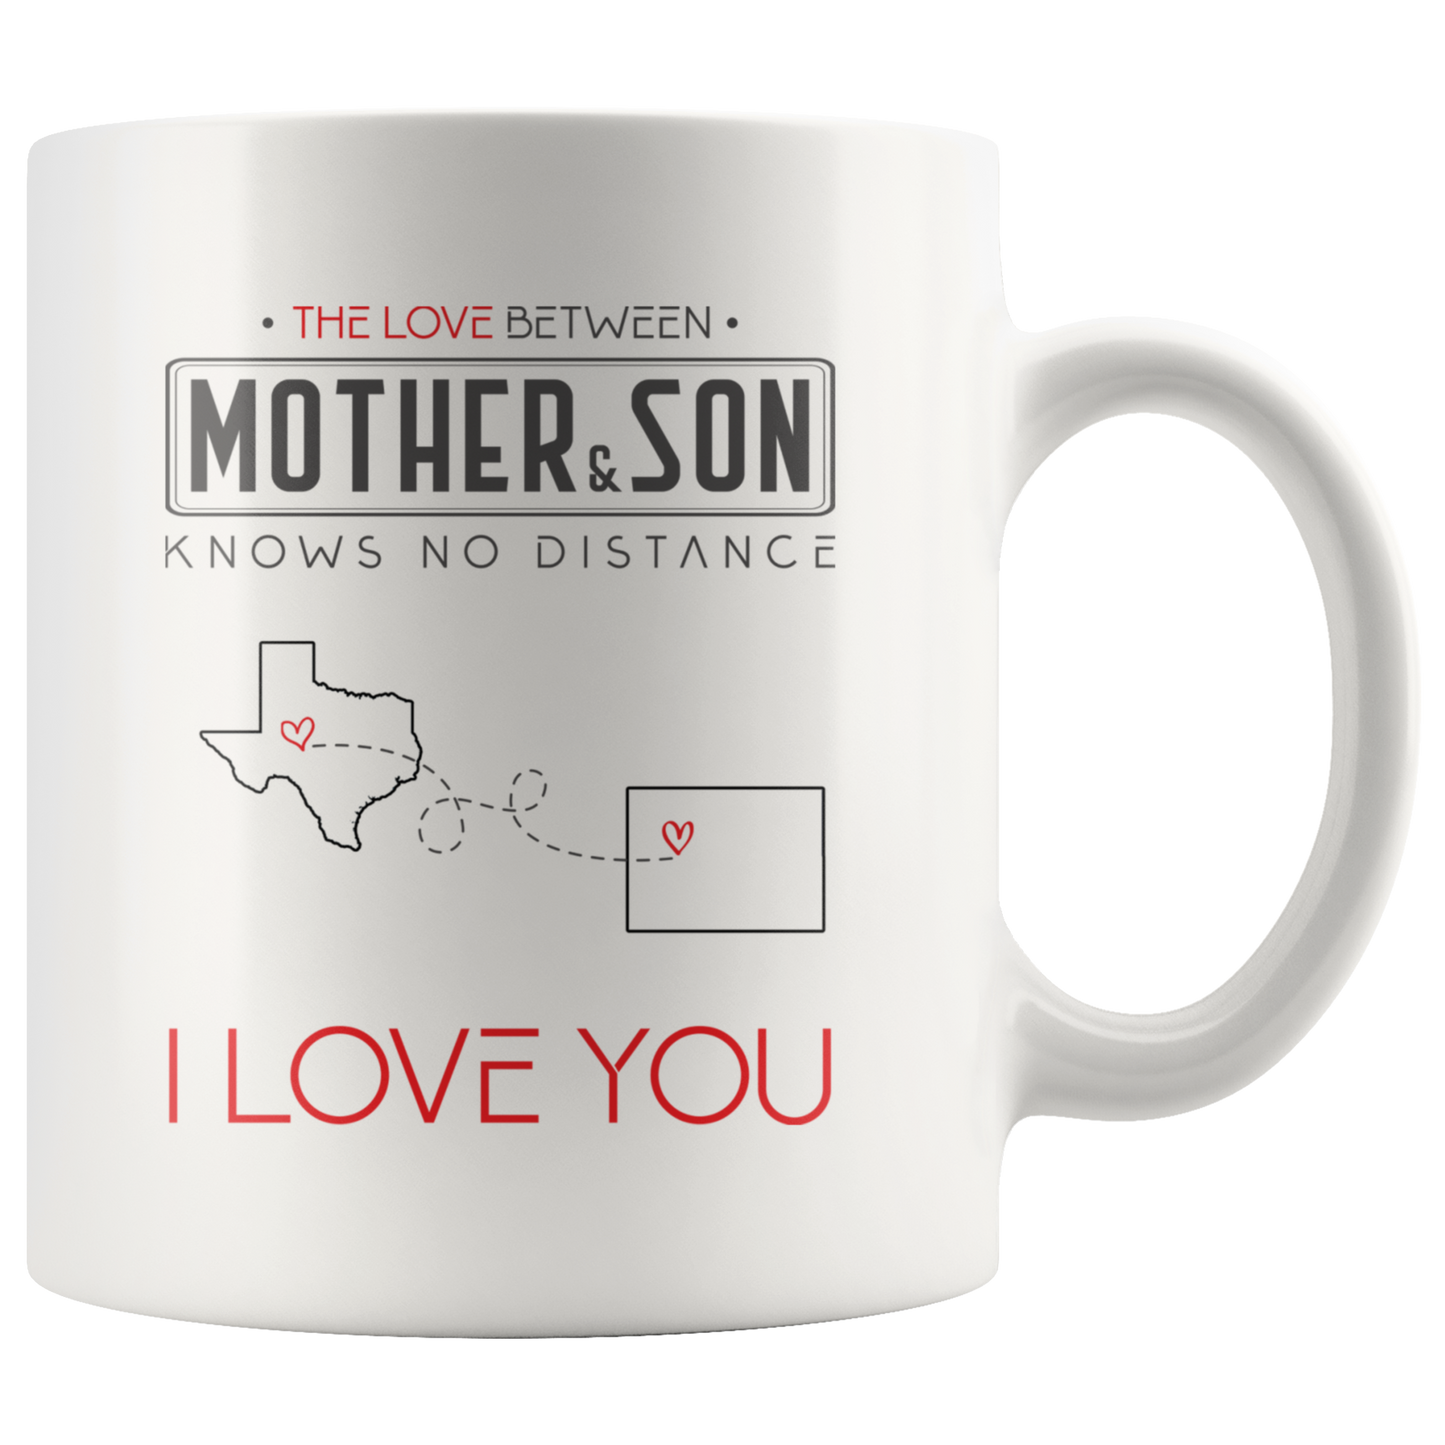 ND-21315402-sp-24132 - [ Texas | Colorado ]Mom And Son Accent Mug 11 oz Red - The Love Between Mother A